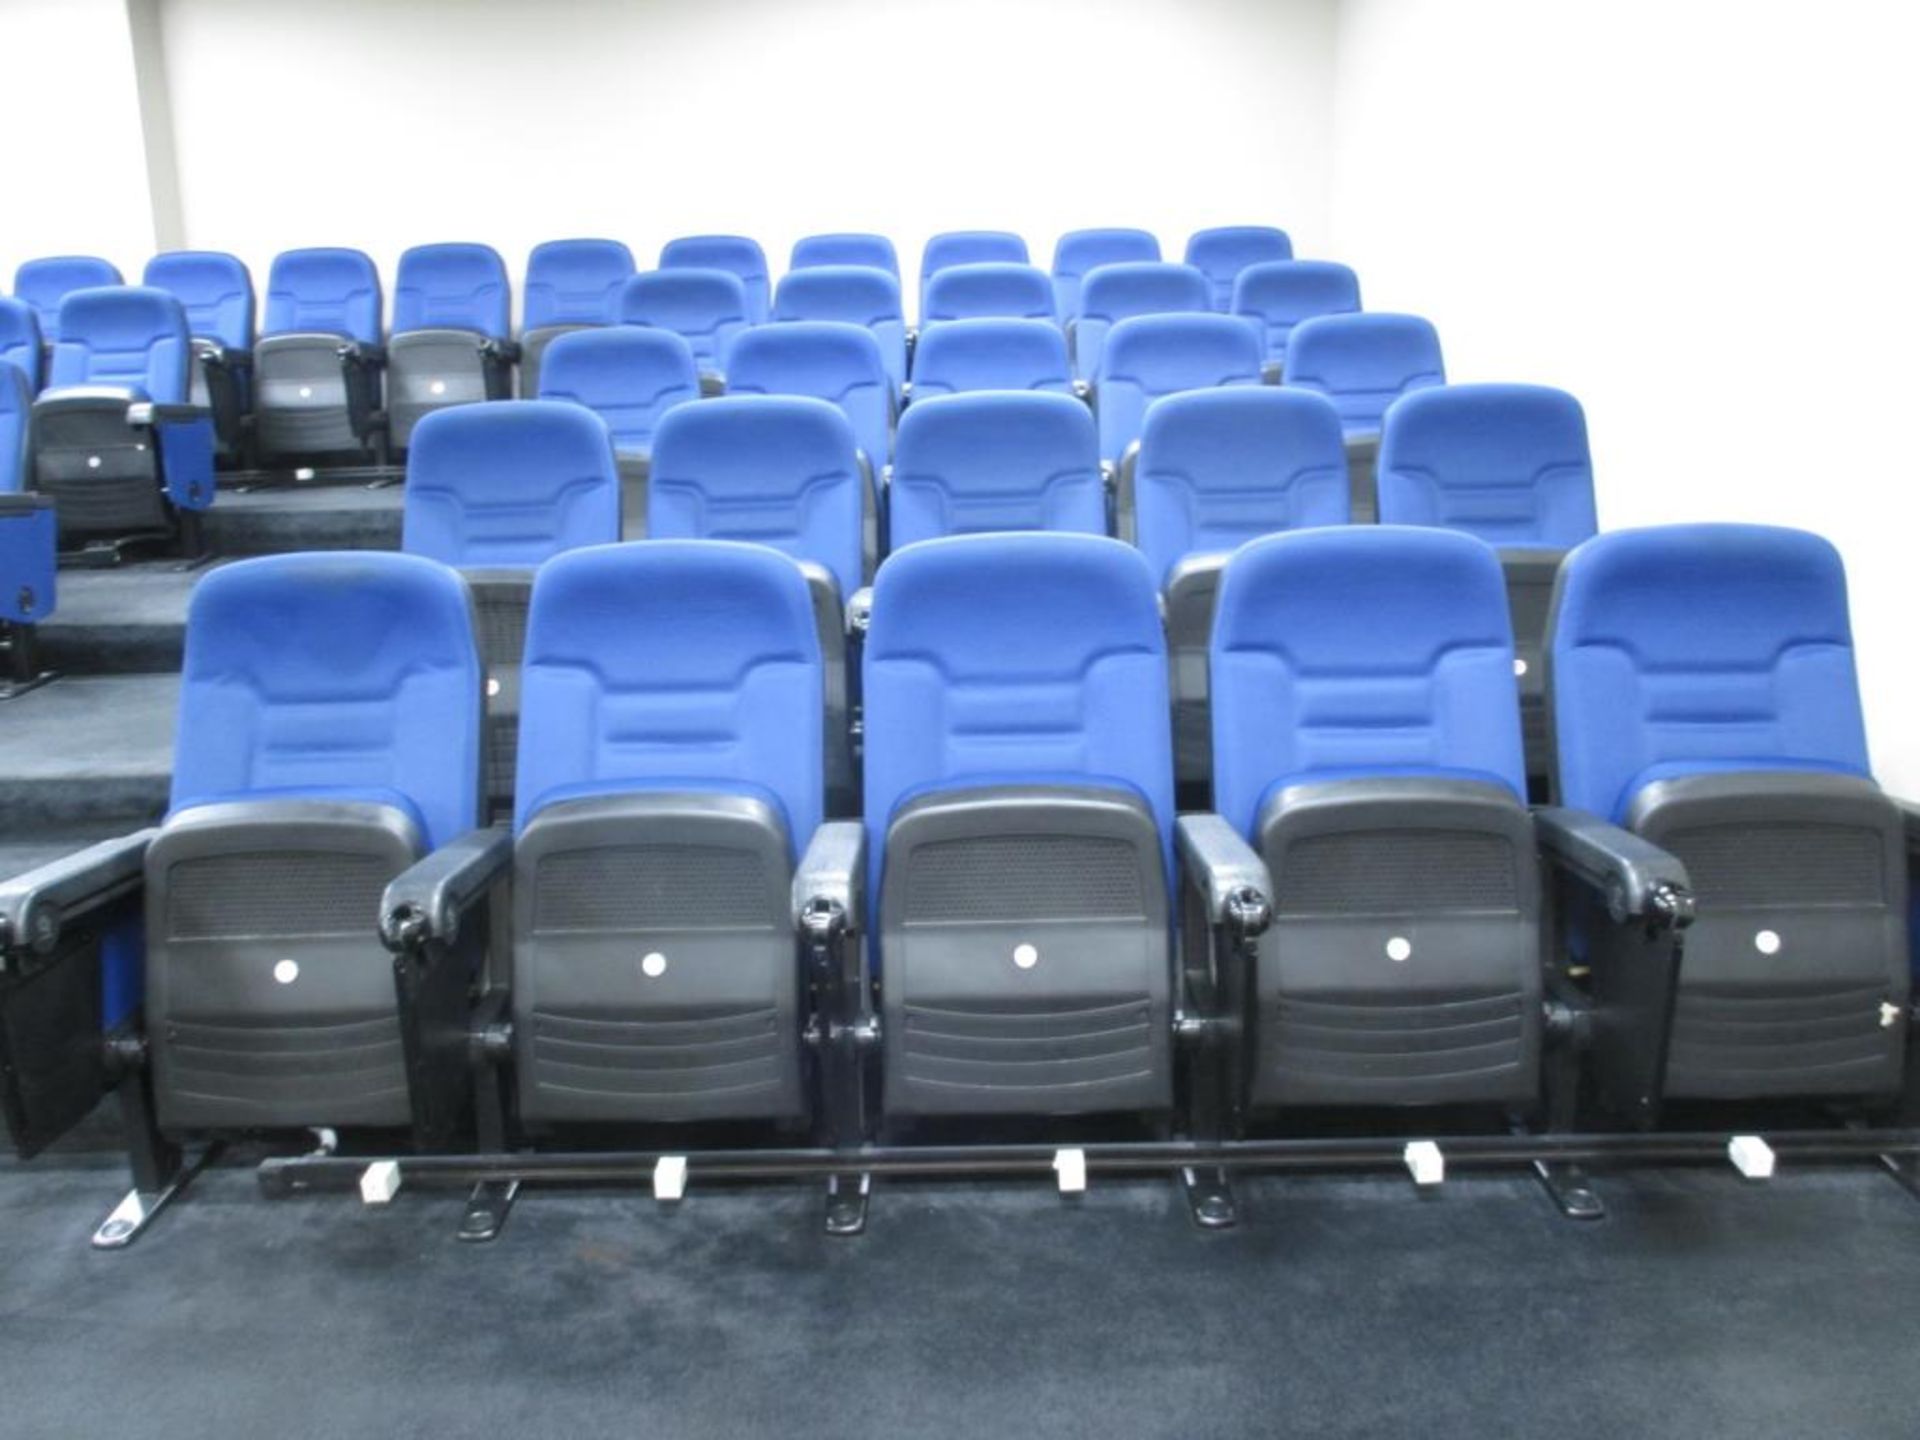 Theater Seating and Podium - Image 2 of 11